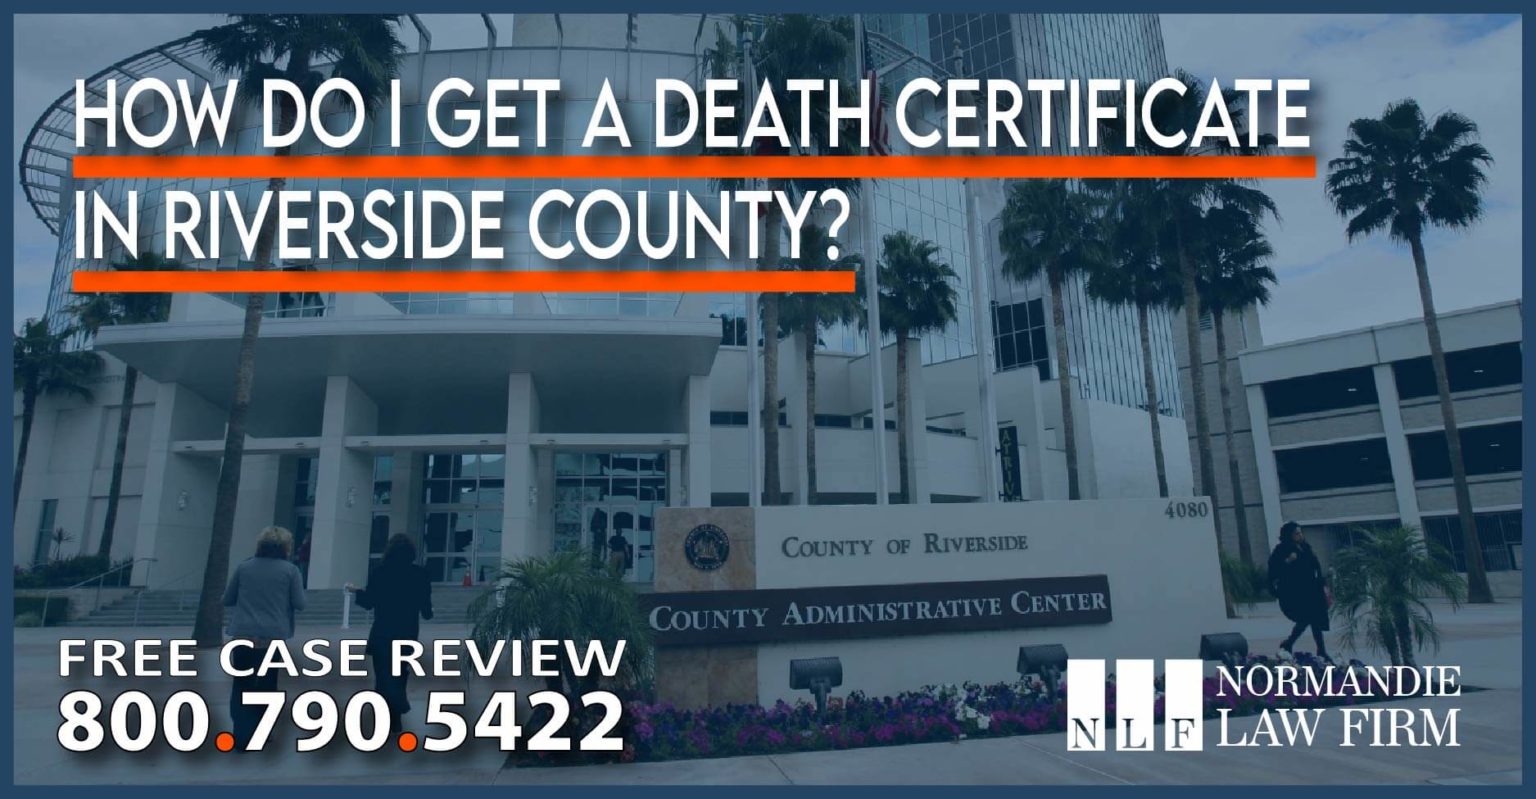 How do I get a Death Certificate in Riverside County?